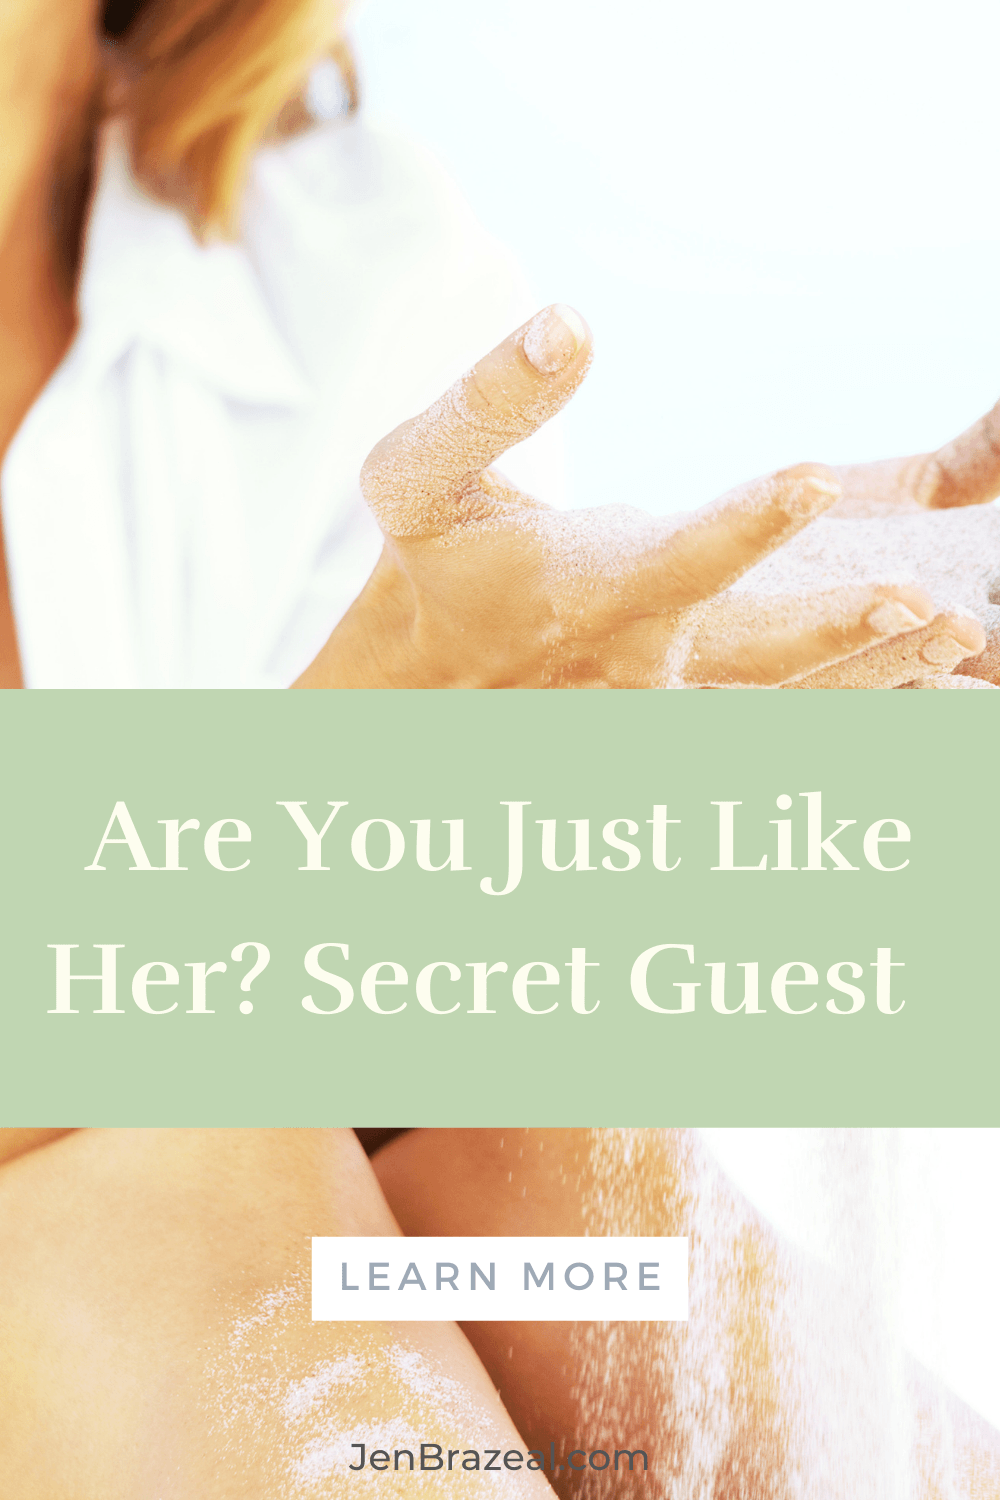 Are You Just Like Her (Secret Guest) | The Unhurried Life 